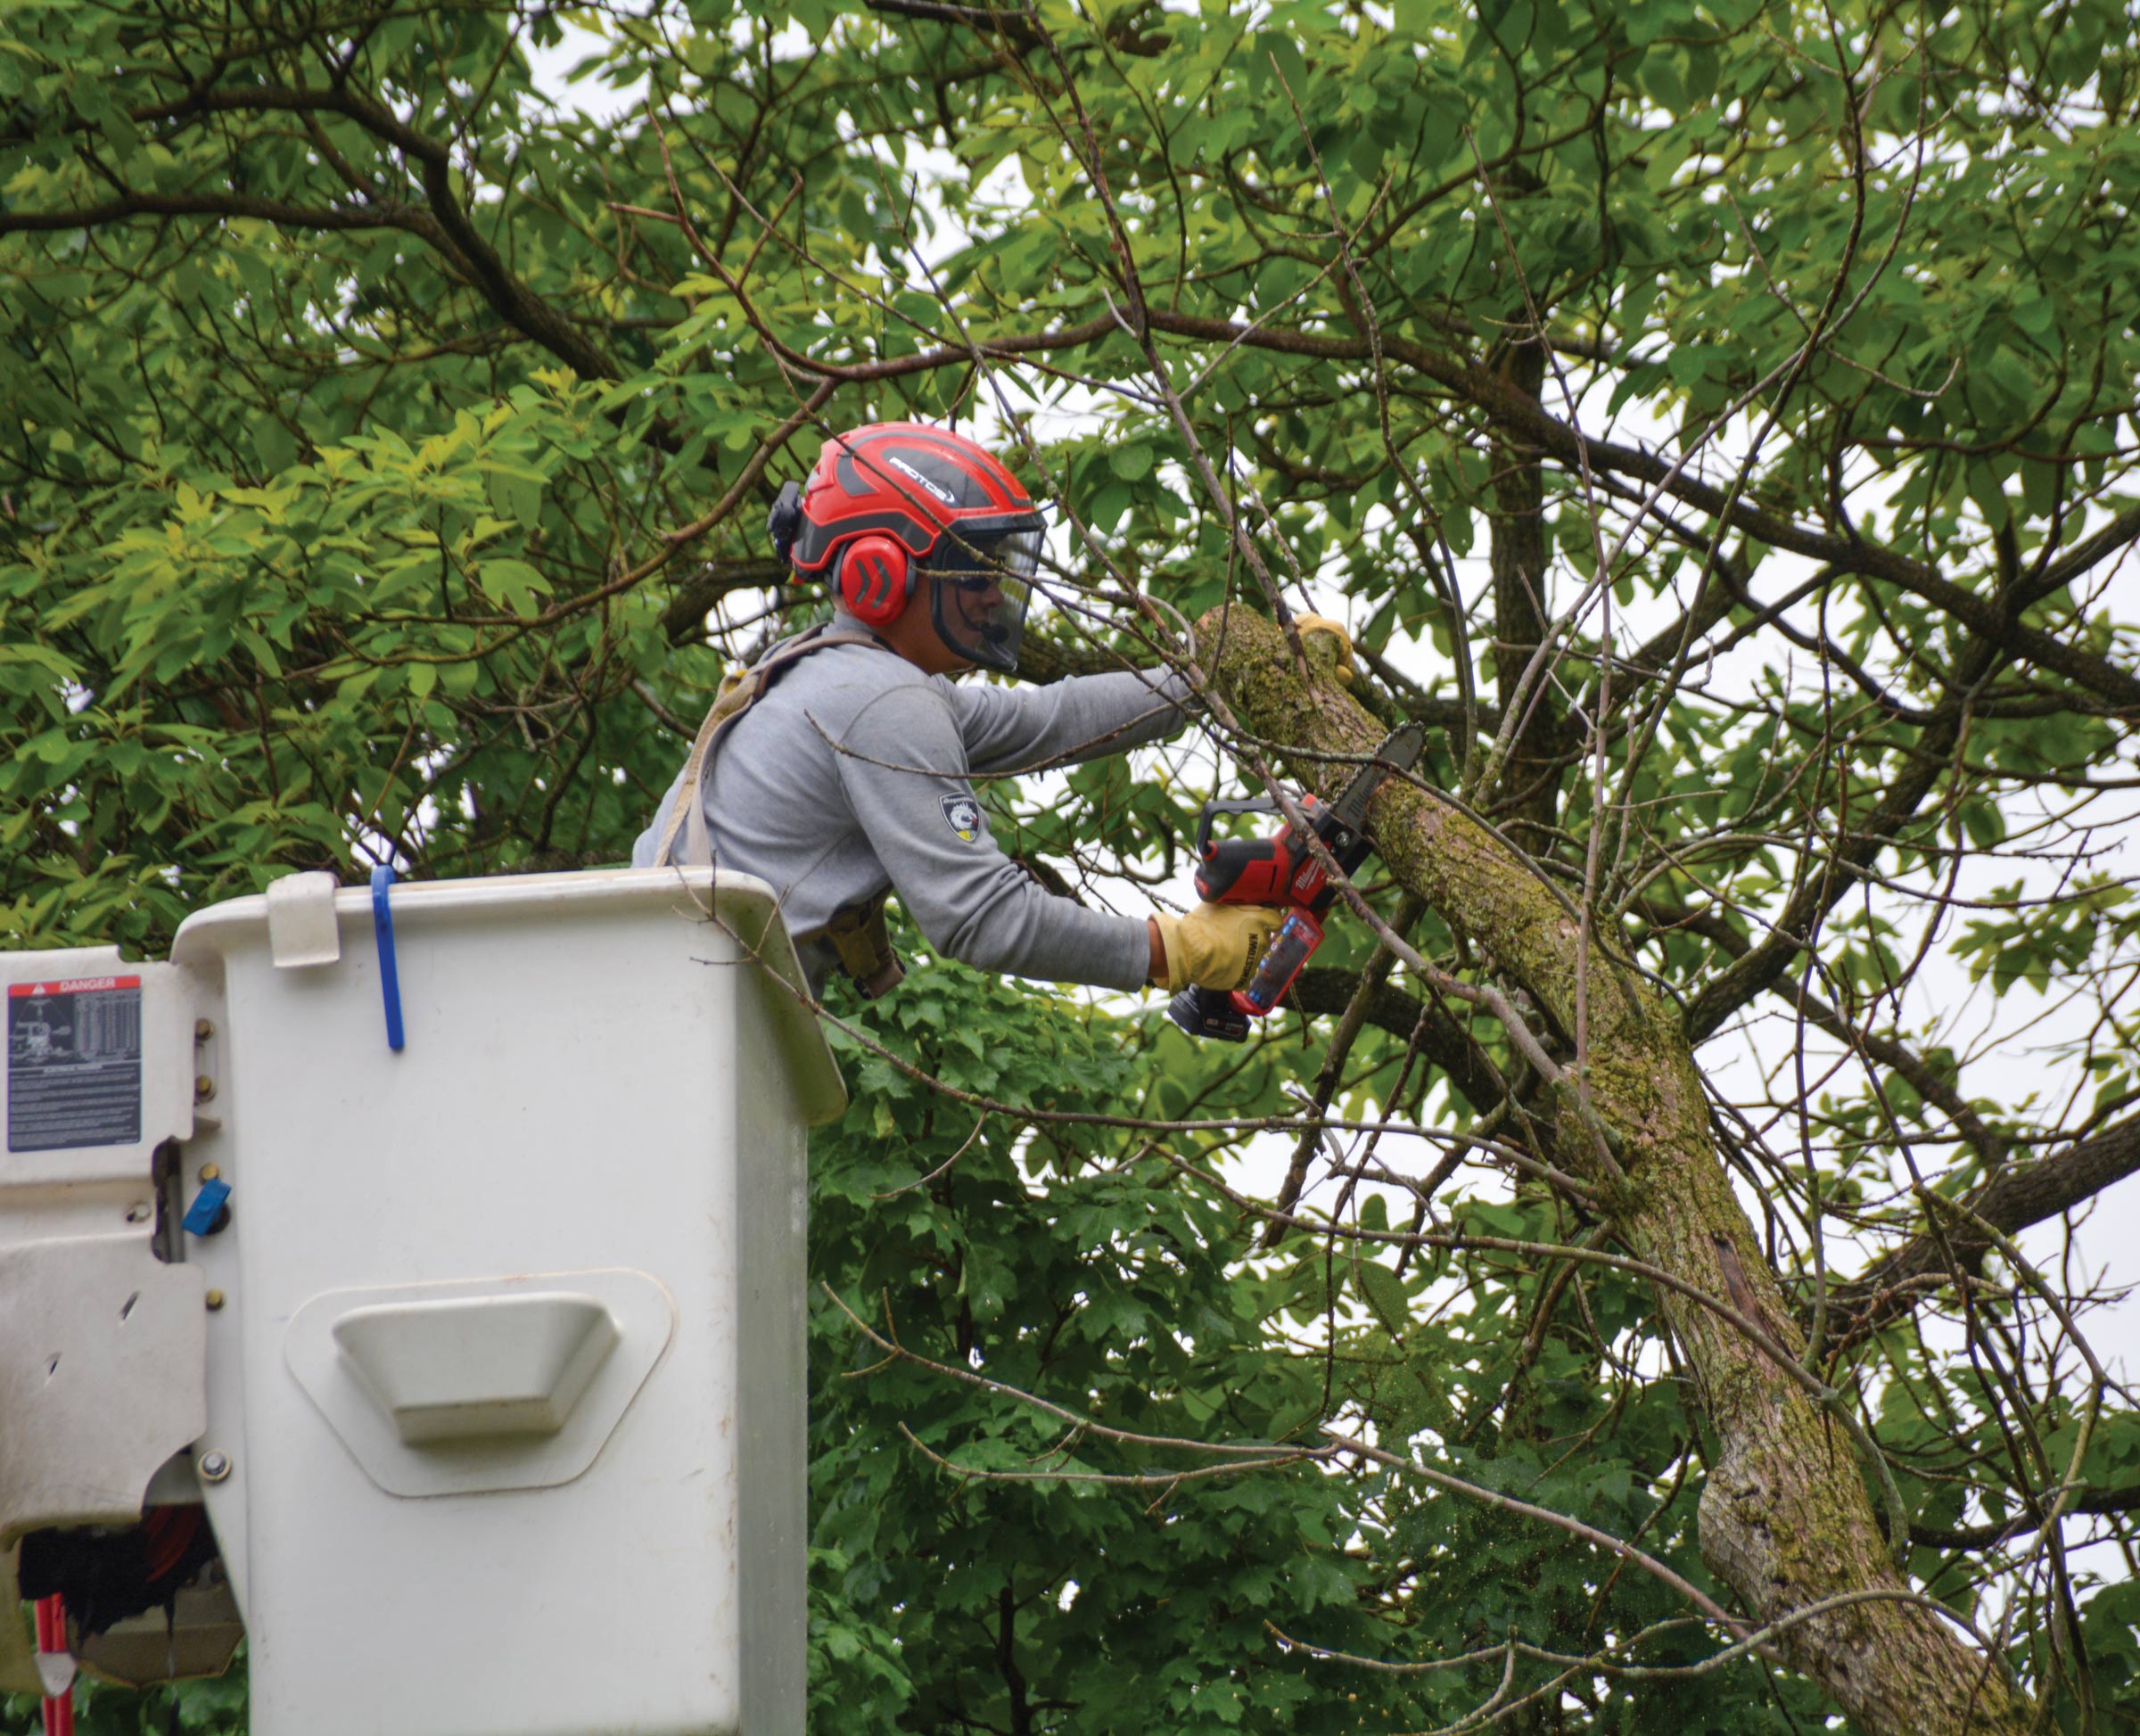 Line worker wearing protective gear uses a chainsaw to cut a tree